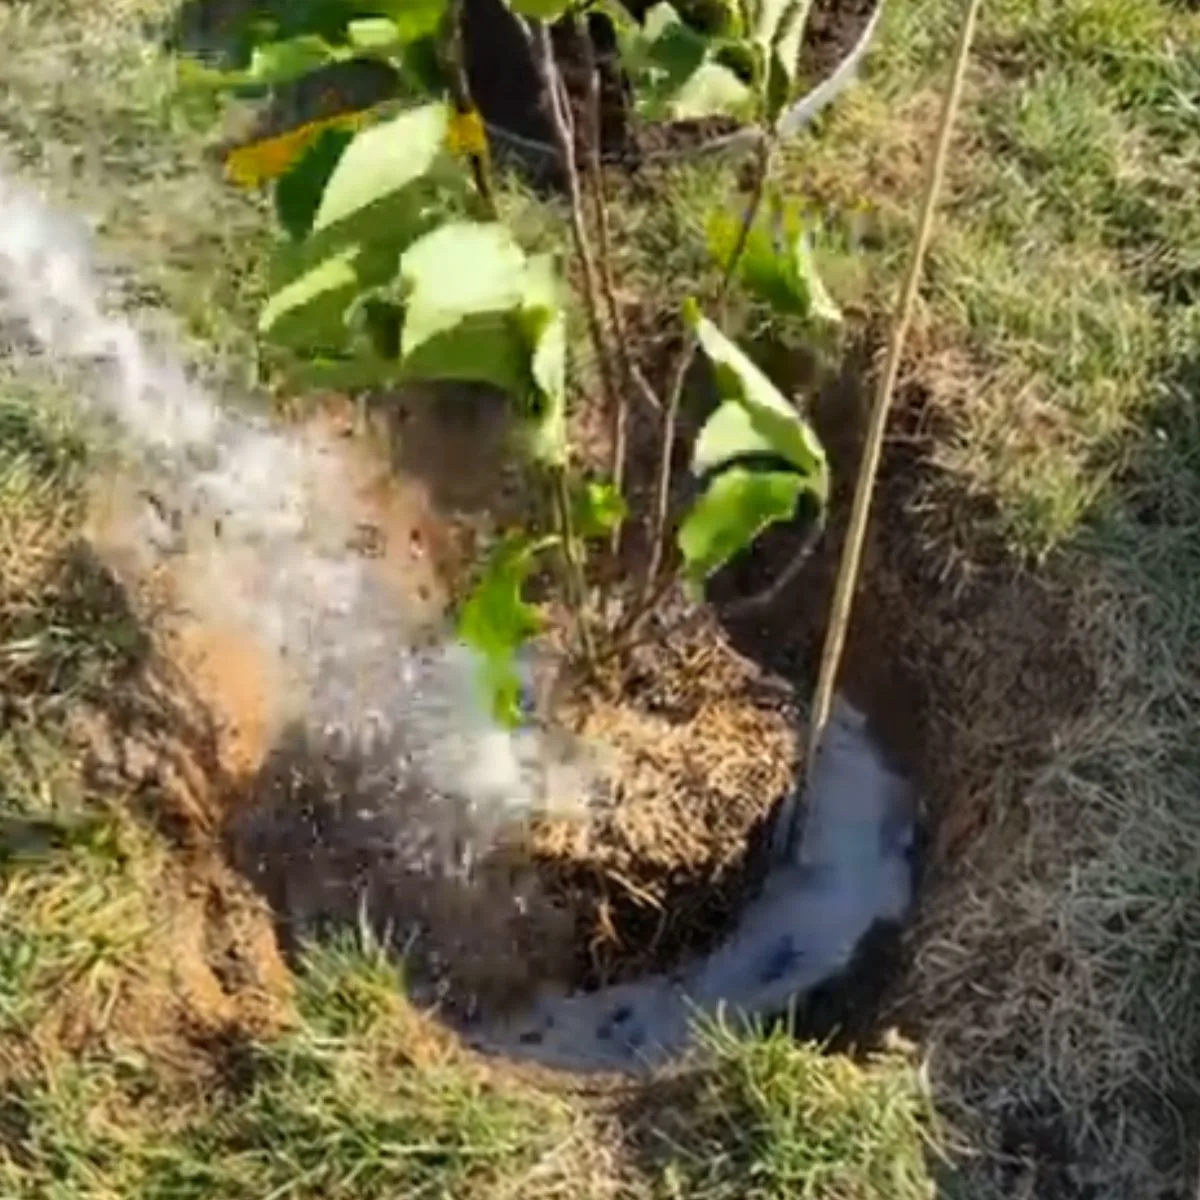 Watering the newly planted tree.